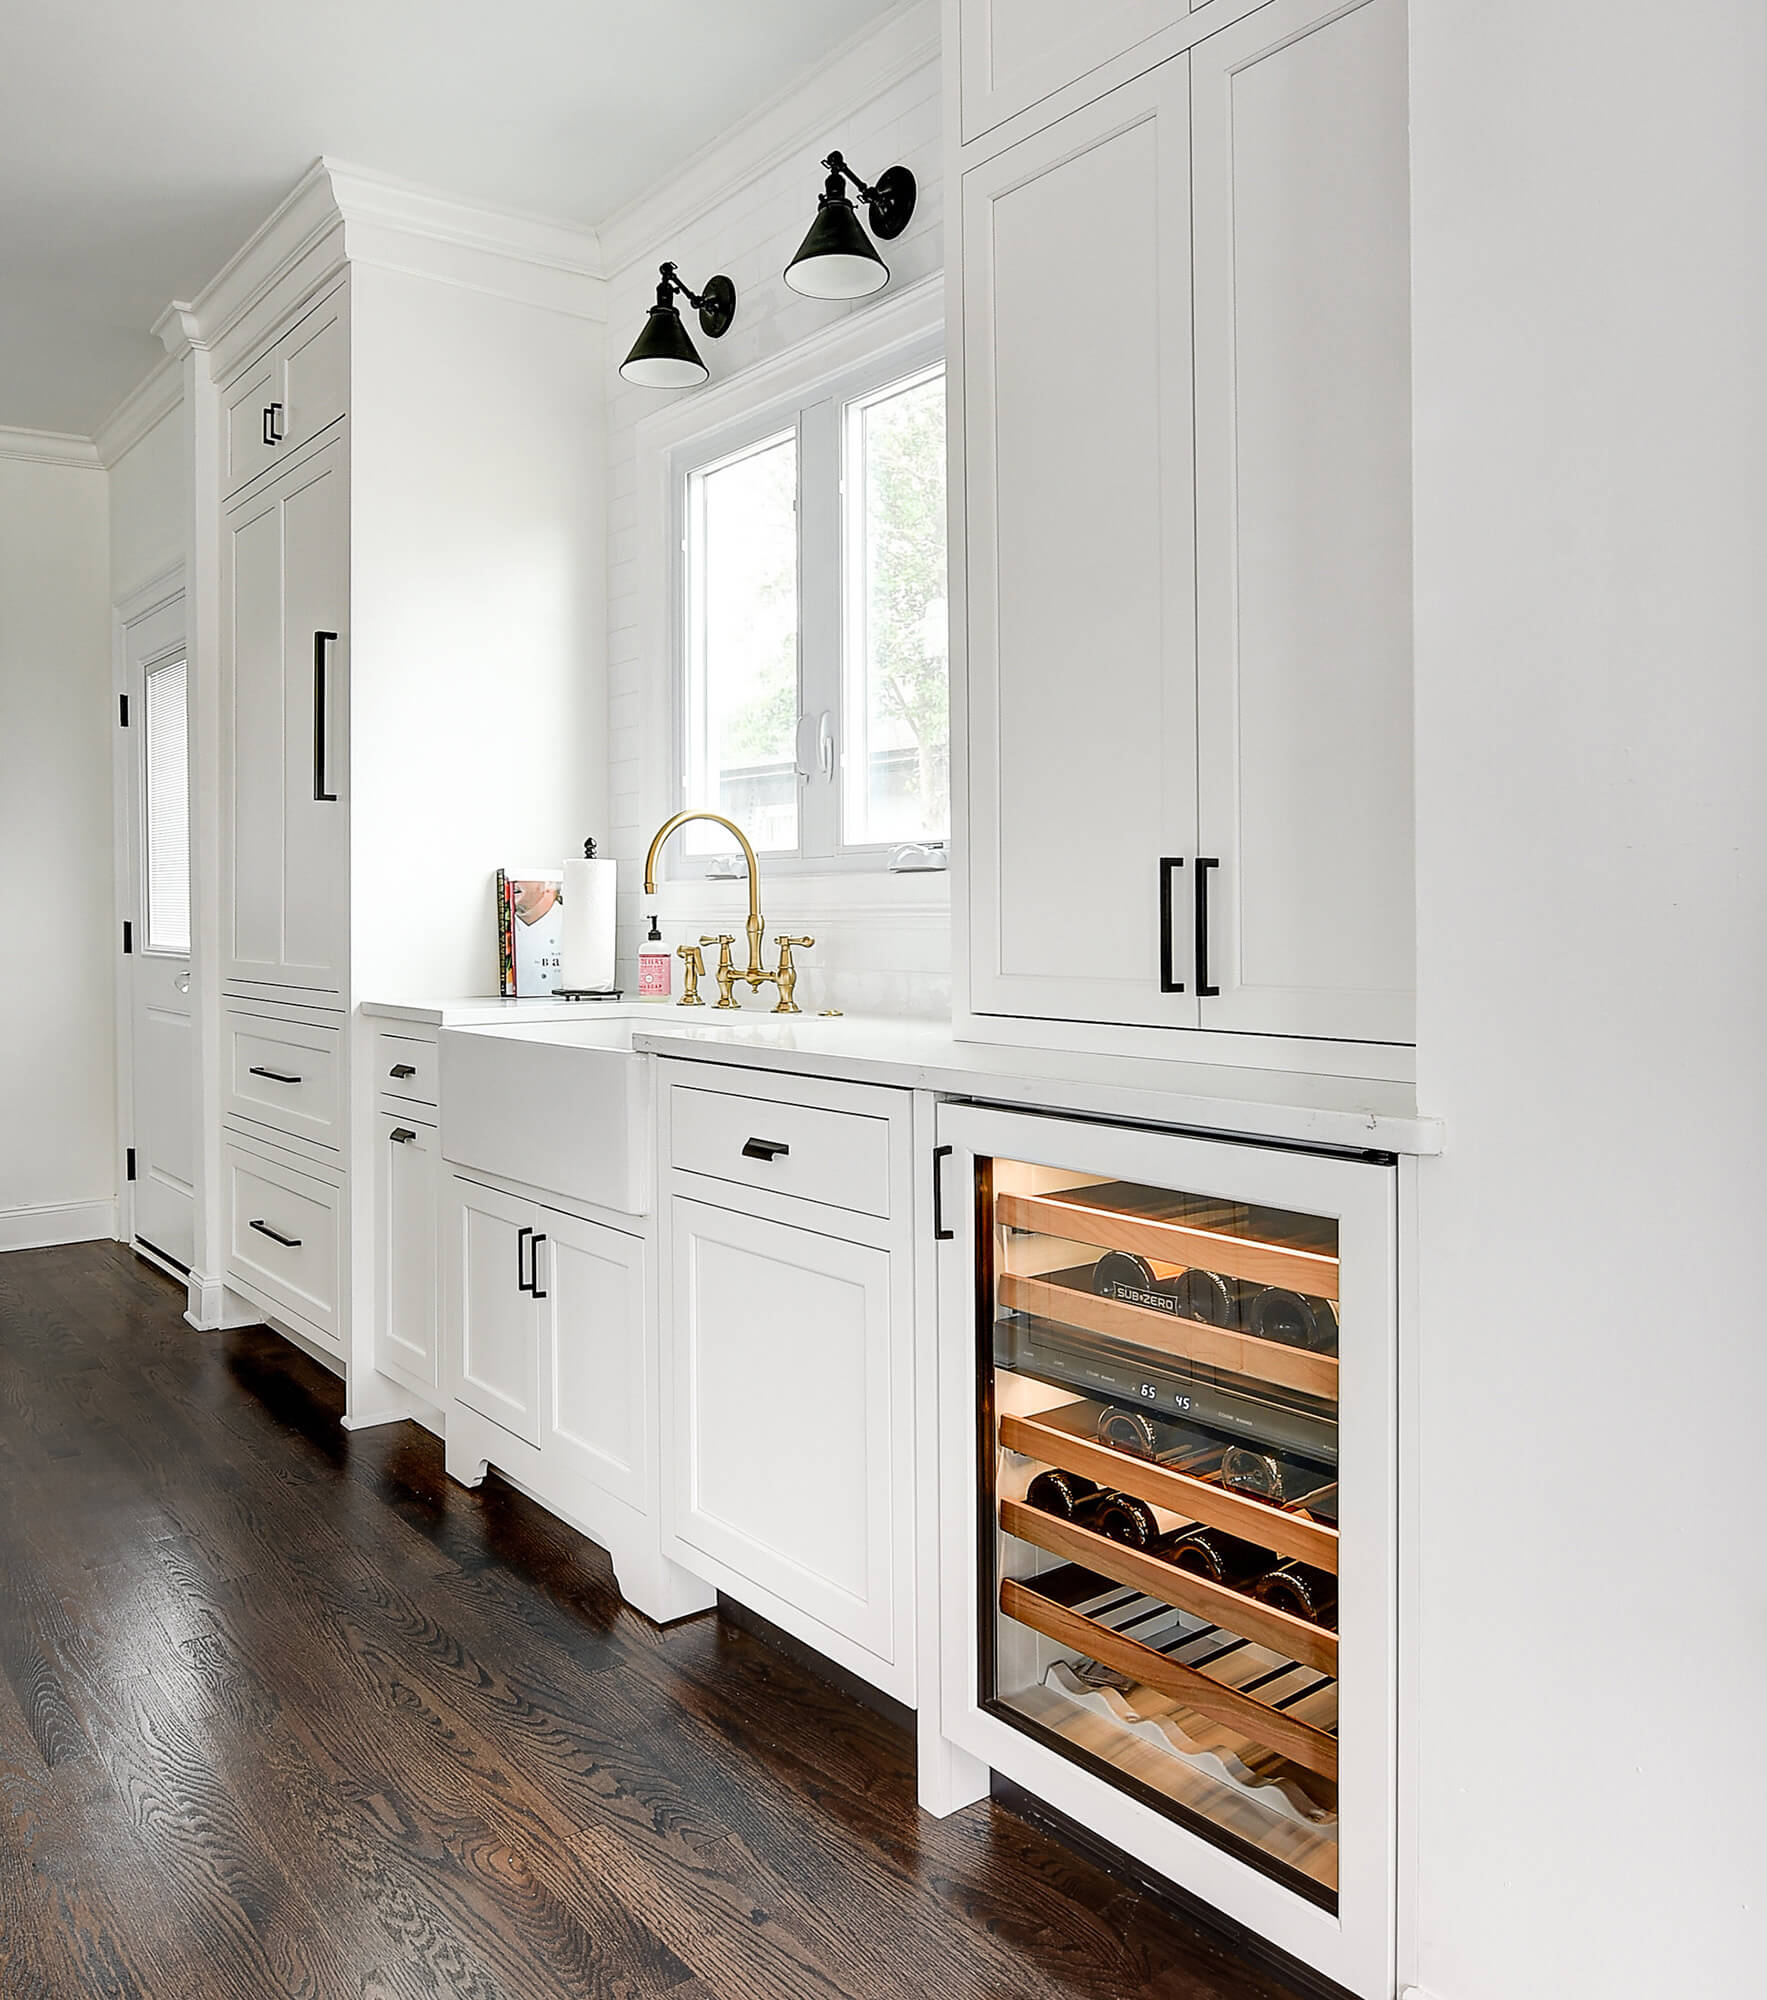 The wall with the sink in this kitchen has a beautiful window view, lots of counter space on both sides of the sink, tons of cabinet storage, and a below counter beverage fridge at the end nearest the dining space.